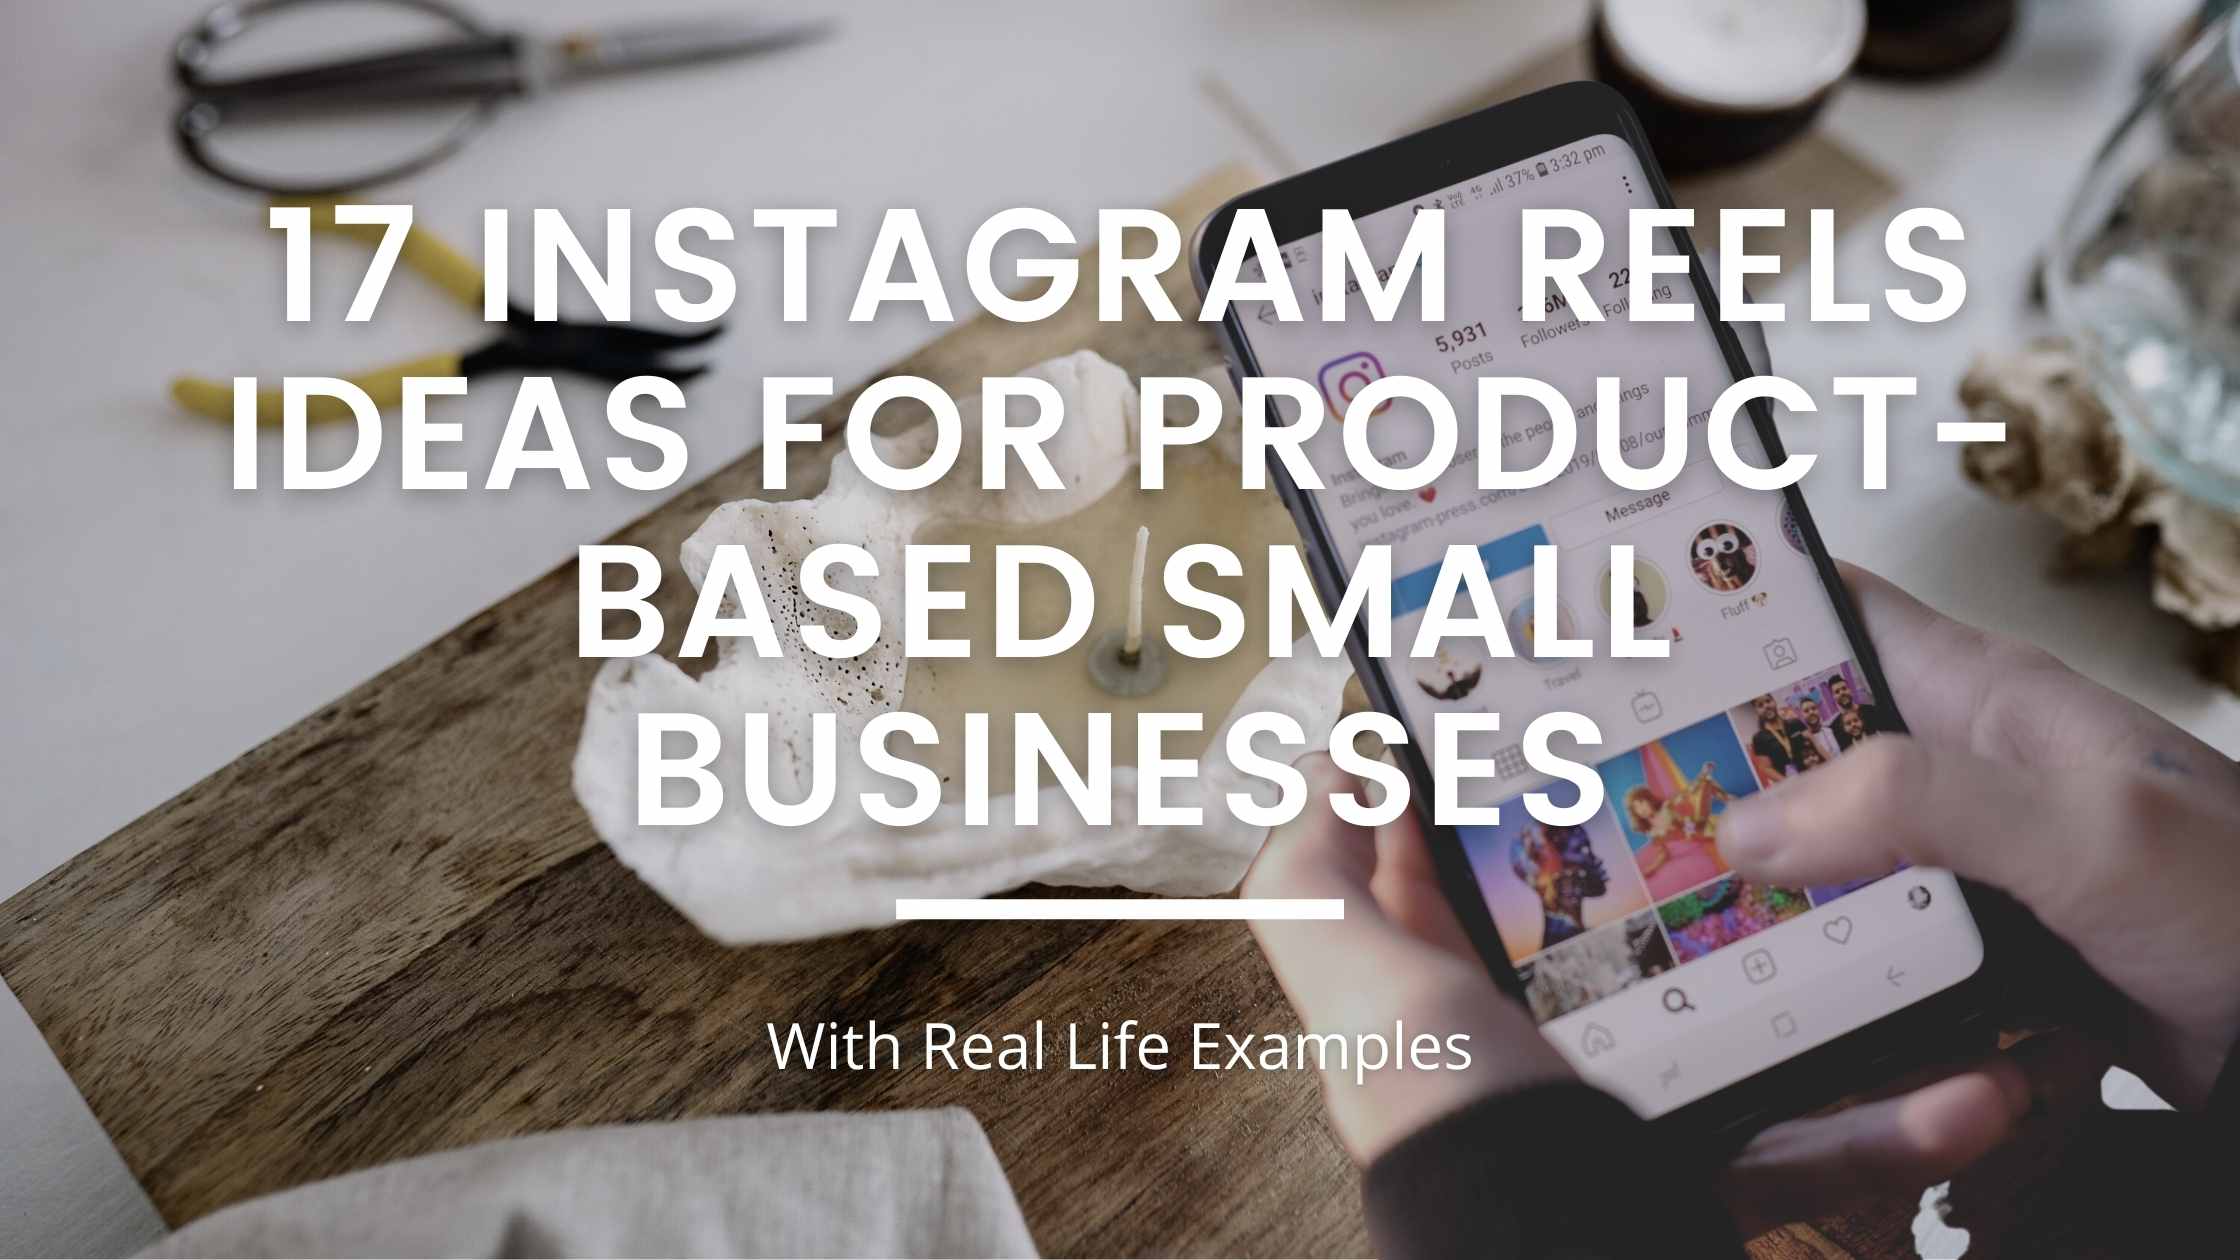 19 Instagram Reels Ideas That'll Help Your Brand Go Viral